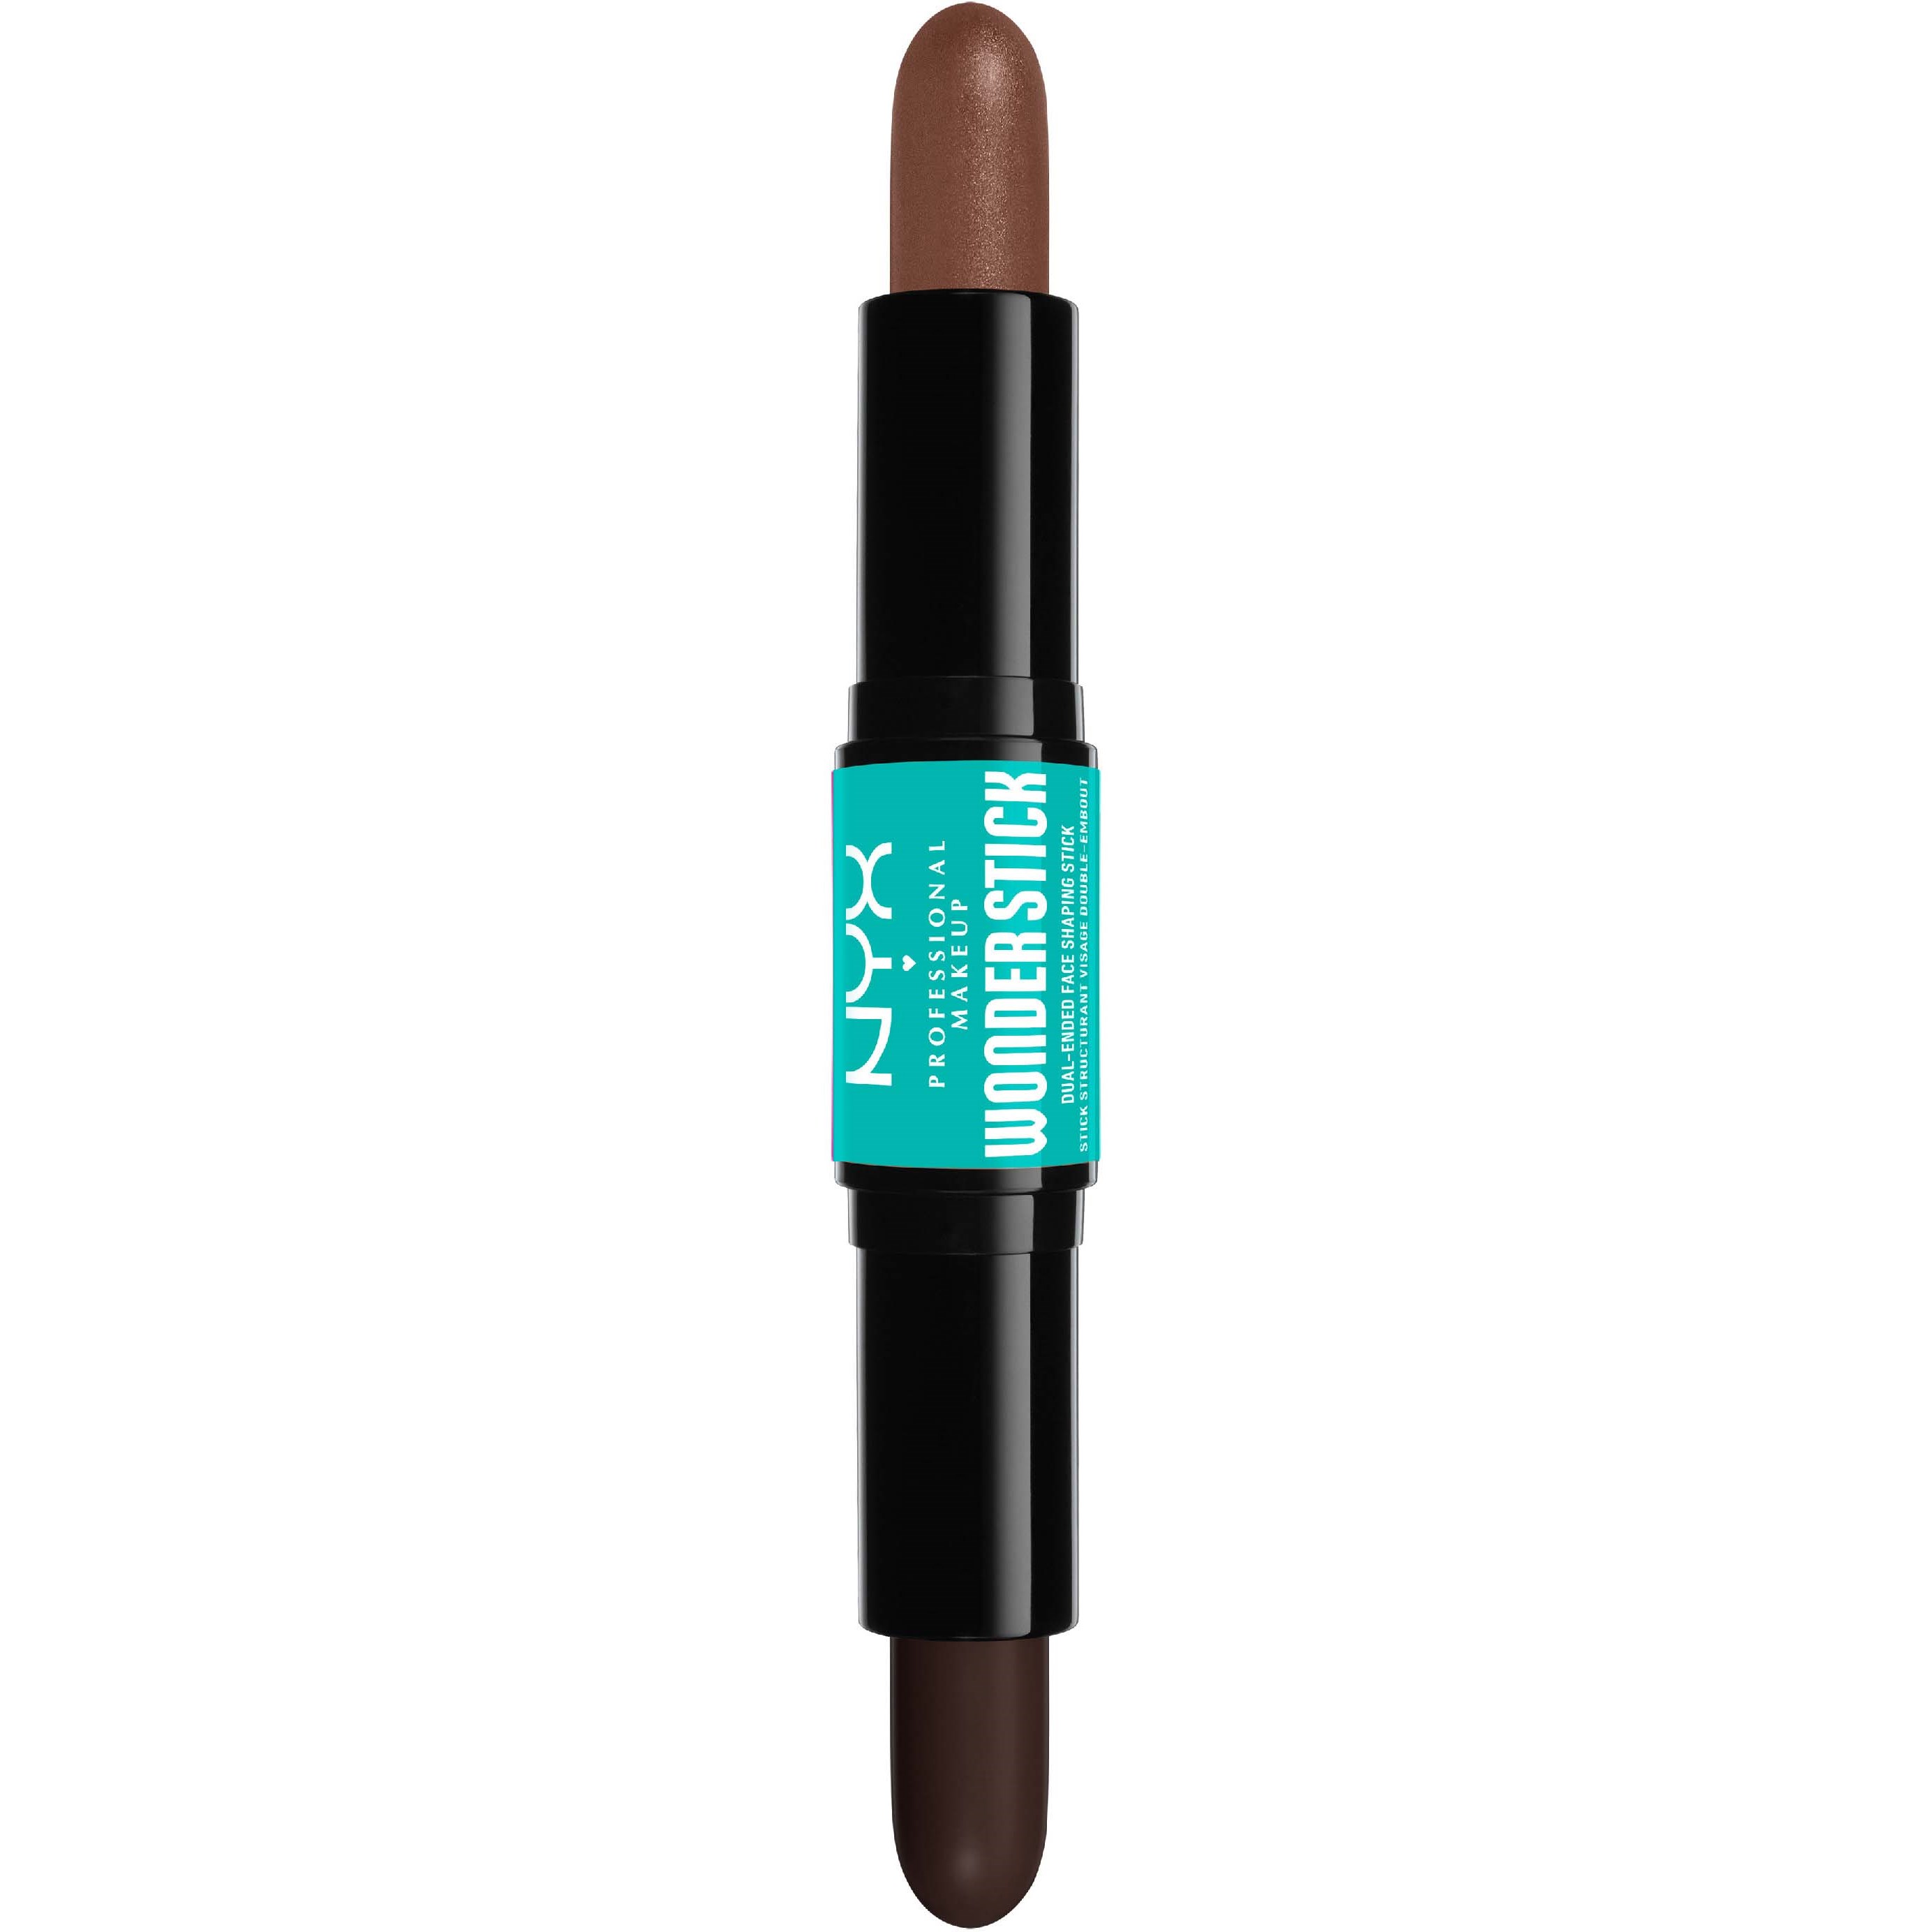 Läs mer om NYX PROFESSIONAL MAKEUP Wonder Stick Dual-Ended Face Shaping Stick 08